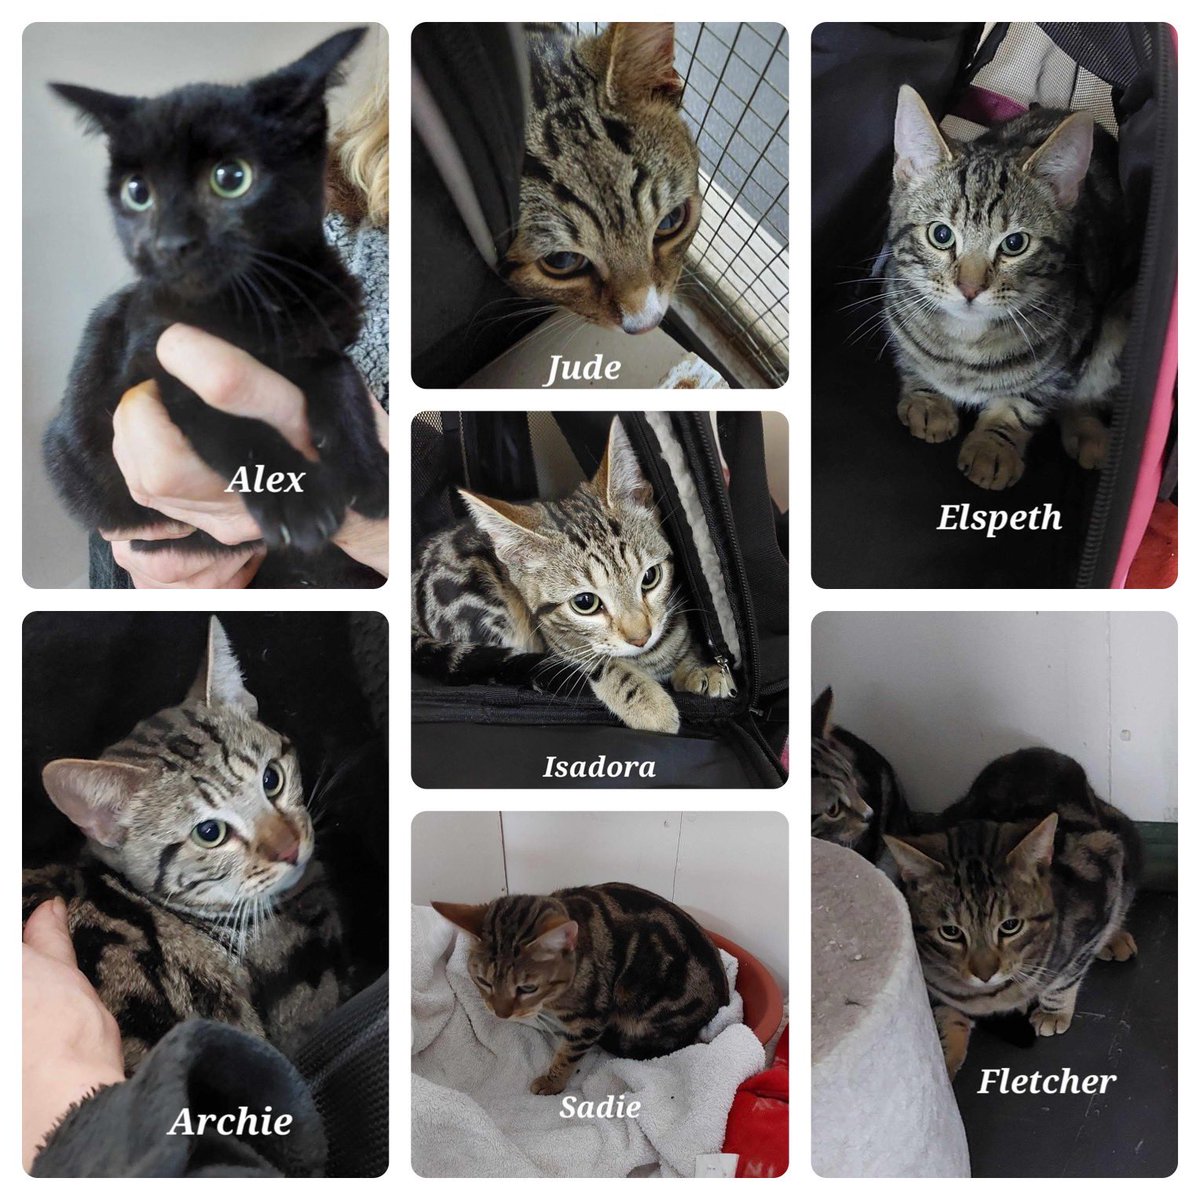 The seven cats that were dumped at our gate 😿 All unneutered and no microchips, covered in fleas and with worms. All very scared but will be cared for now. #neuteryourcats #adoptdontshop